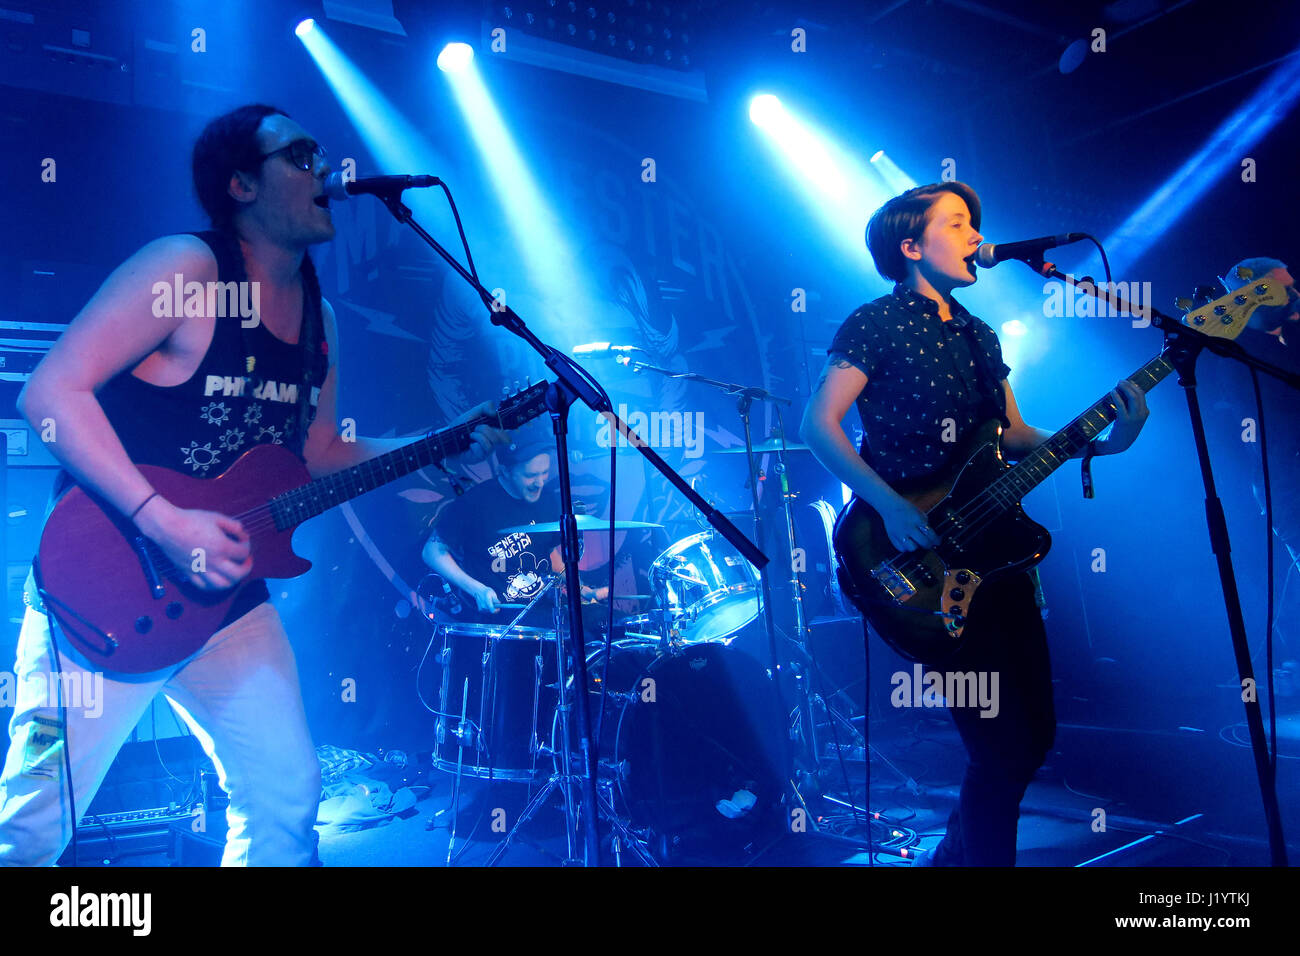 Manchester, UK. 22nd April, 2017. Daniel Ellis and Naomi Griffin  of Martha the County Durham indie pop punk band performing live in concert at Gorilla in Manchester as part of the Manchester Punk Fest (22.04.2017) Credit: Chris Rogers/Alamy Live News Stock Photo